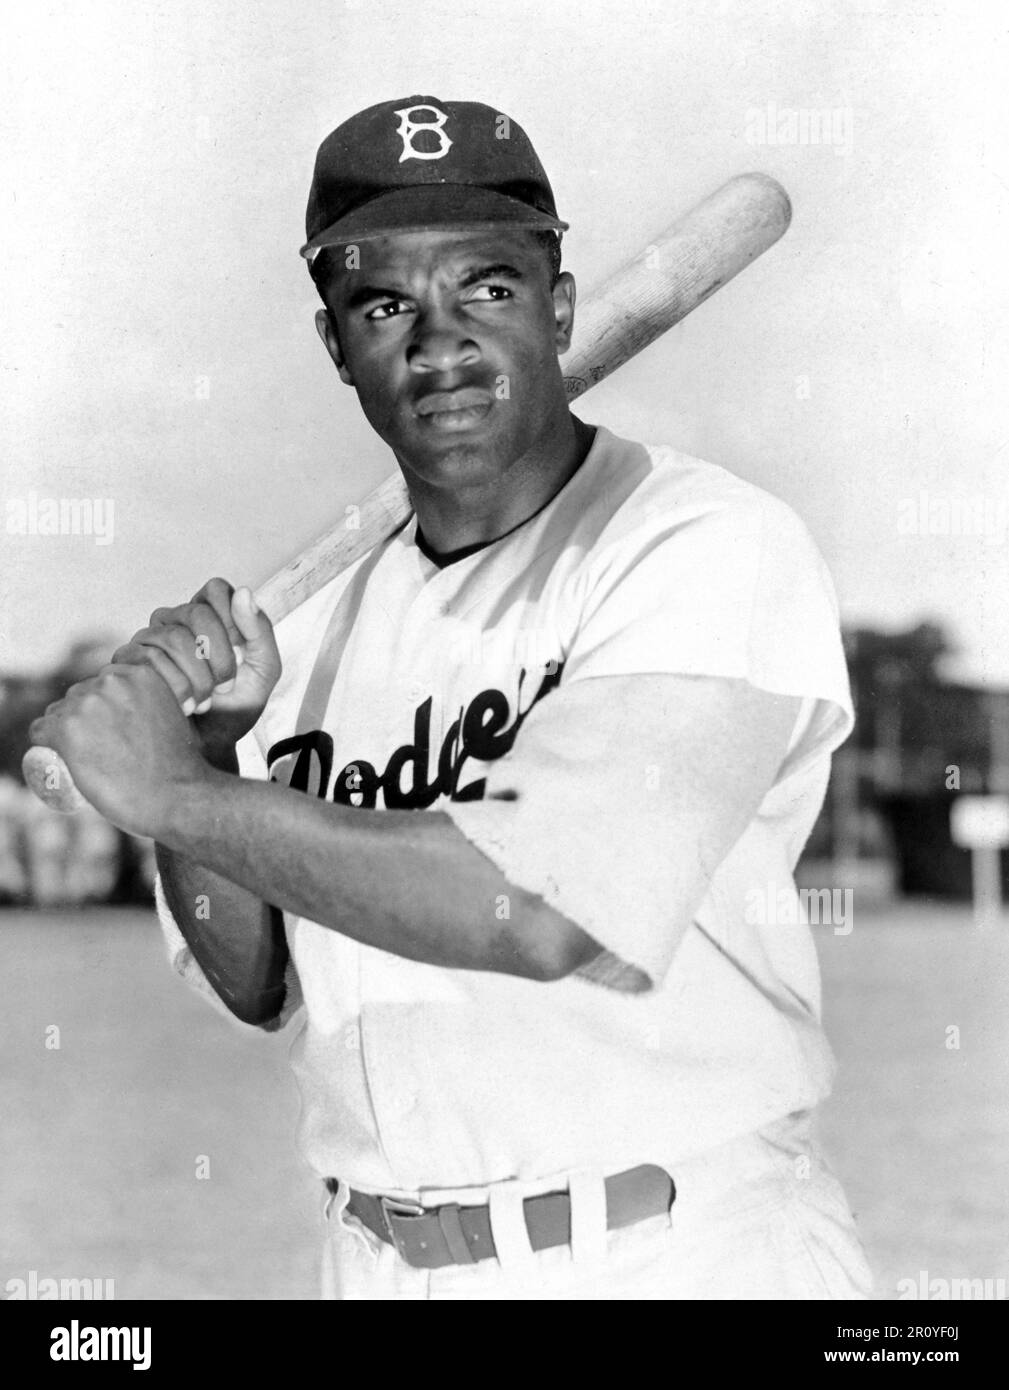 Jackie Robinson (1919-1972) in Brooklyn Dodgers uniform, 1949. Robinson was the first black player in Major League Baseball. Stock Photo